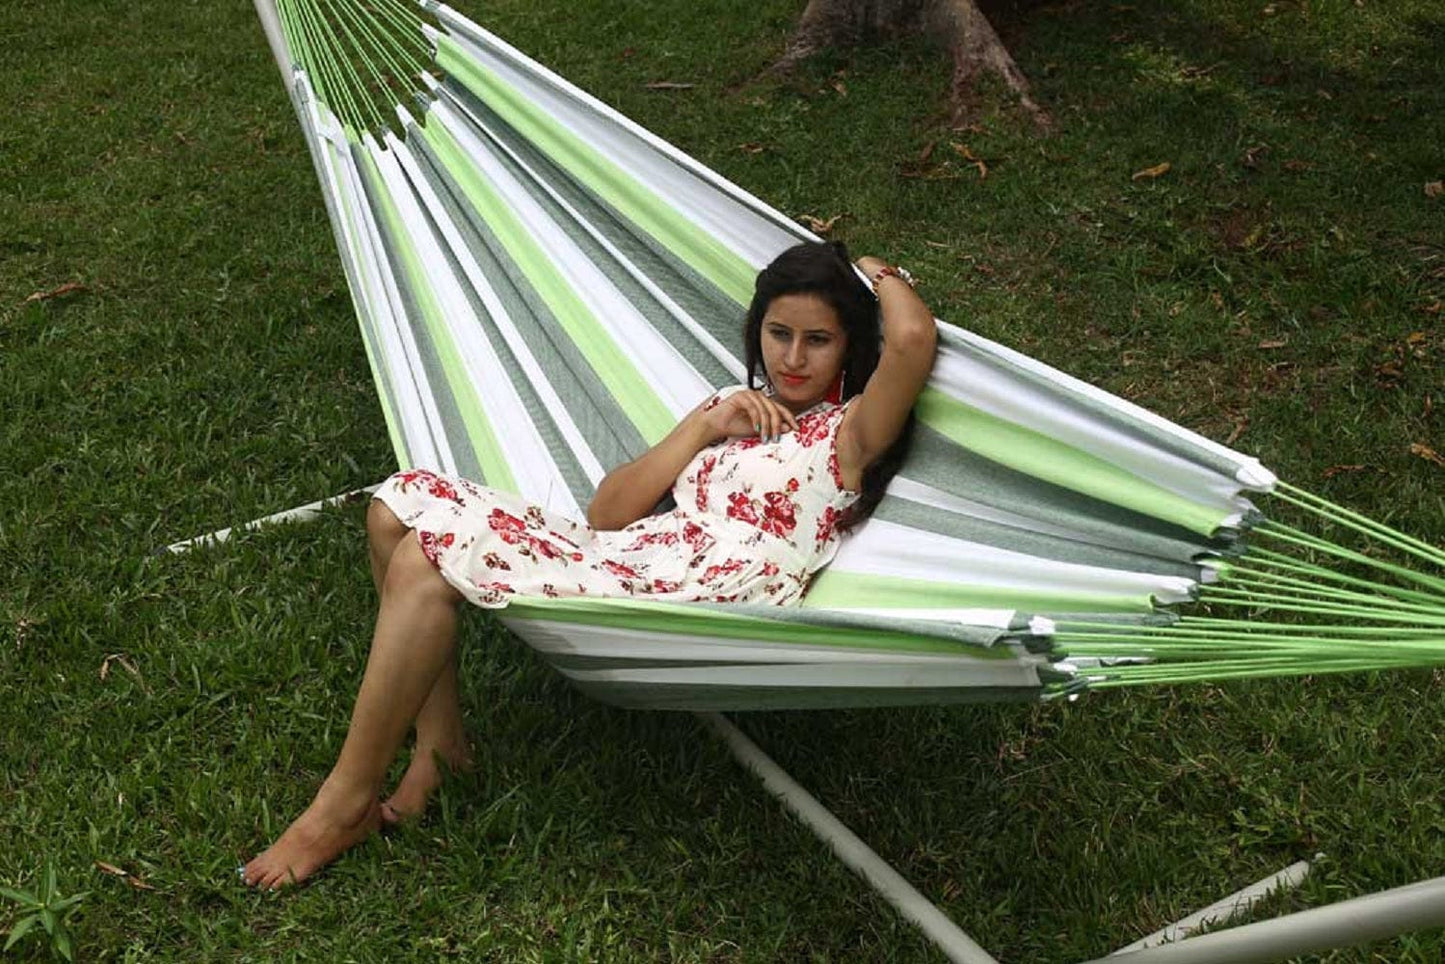 Brazilian Cotton Canvas Hammock for Two Person, Weight Capacity of 180 kg- 150W X 200L cm